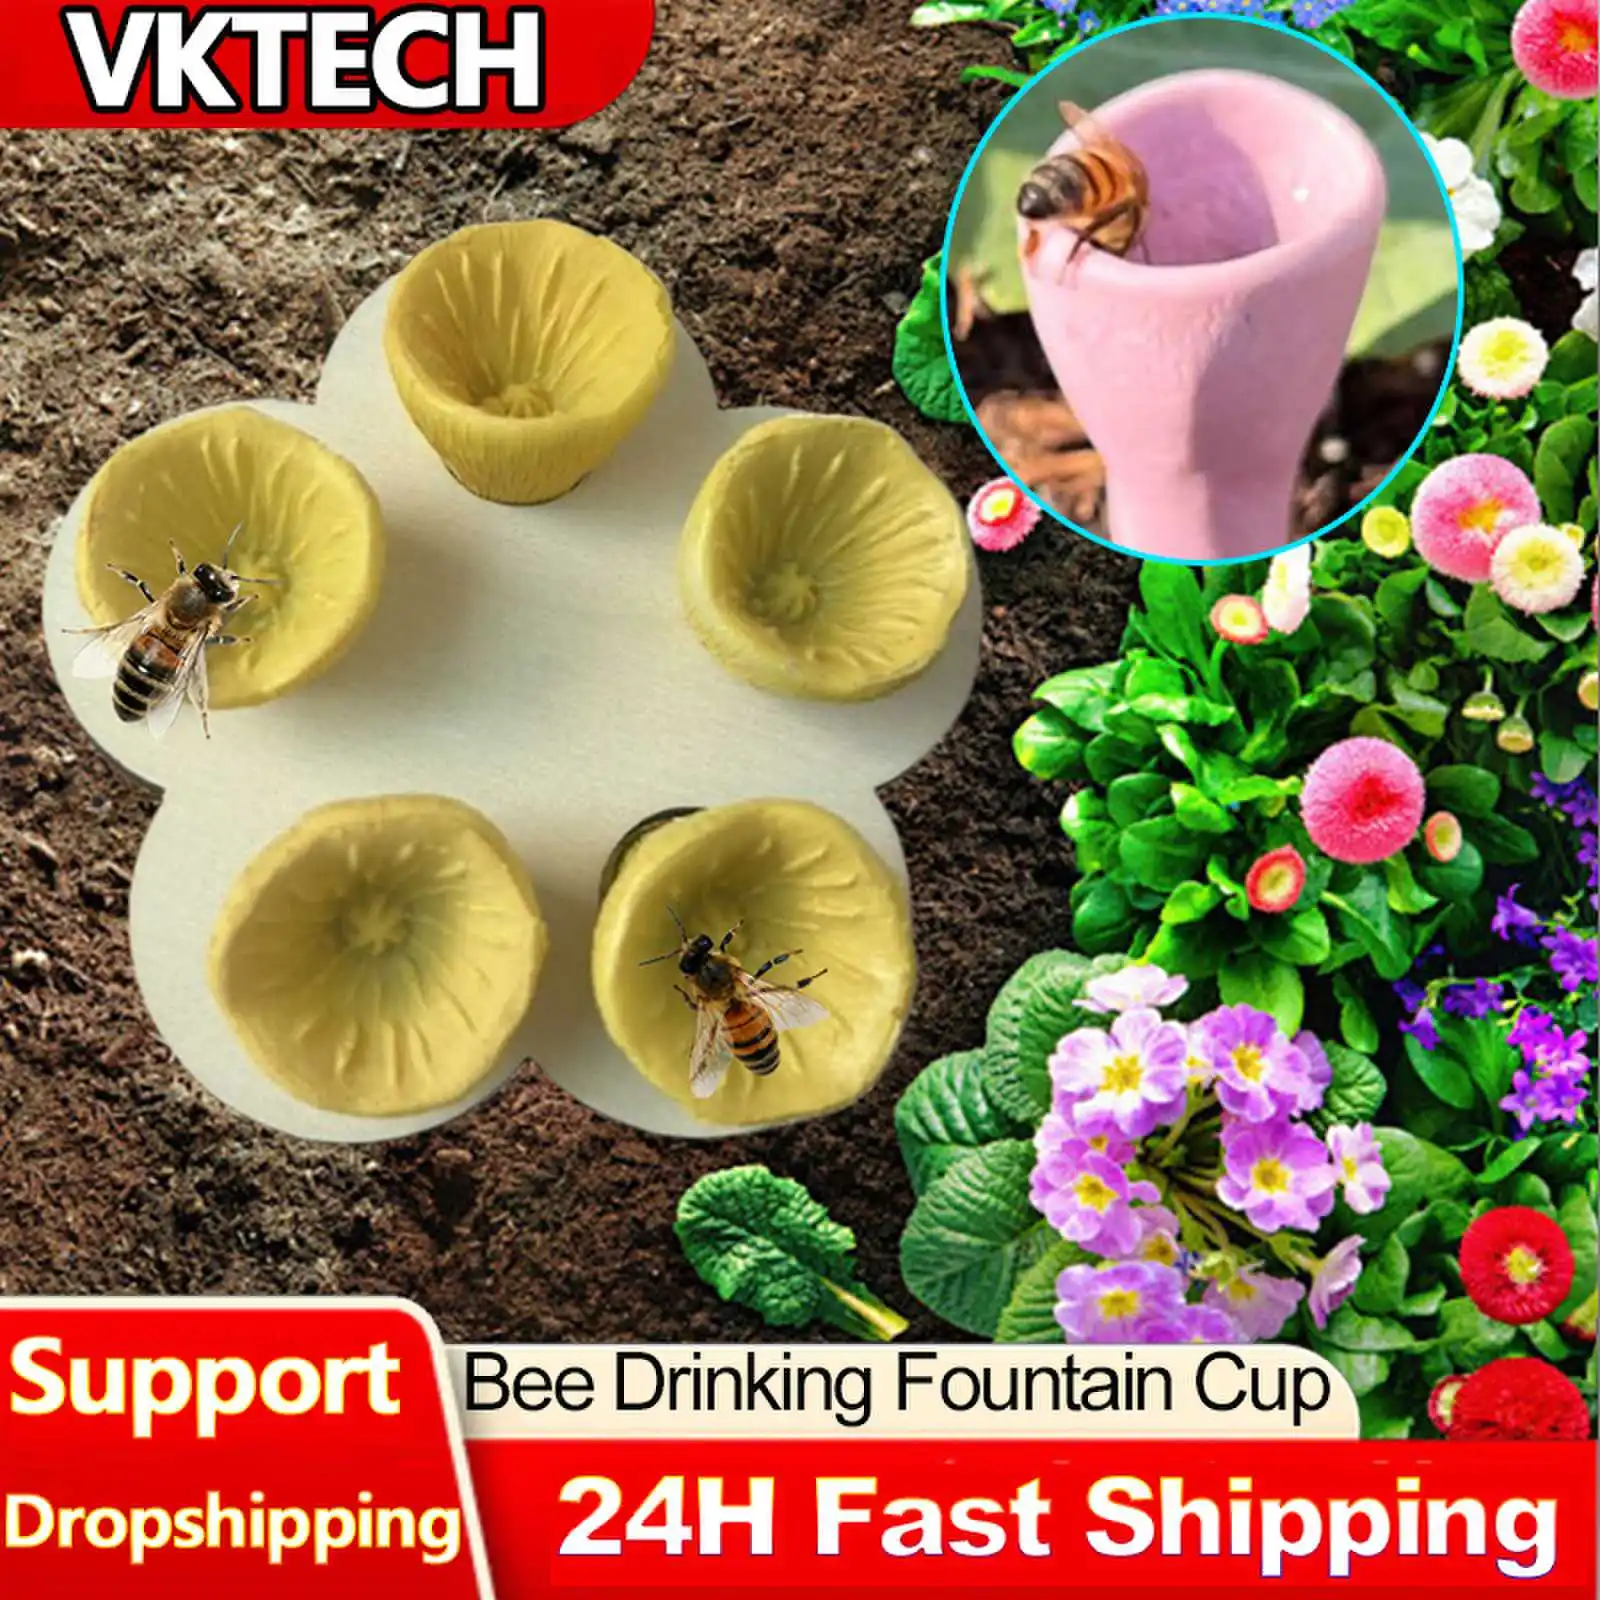 

Bees Insect Drinking Cup Decor 5 Flower Bee Drinker Cups Easy To Use Garden Balcony Bees Colourful Water Feeder for Beekeeping